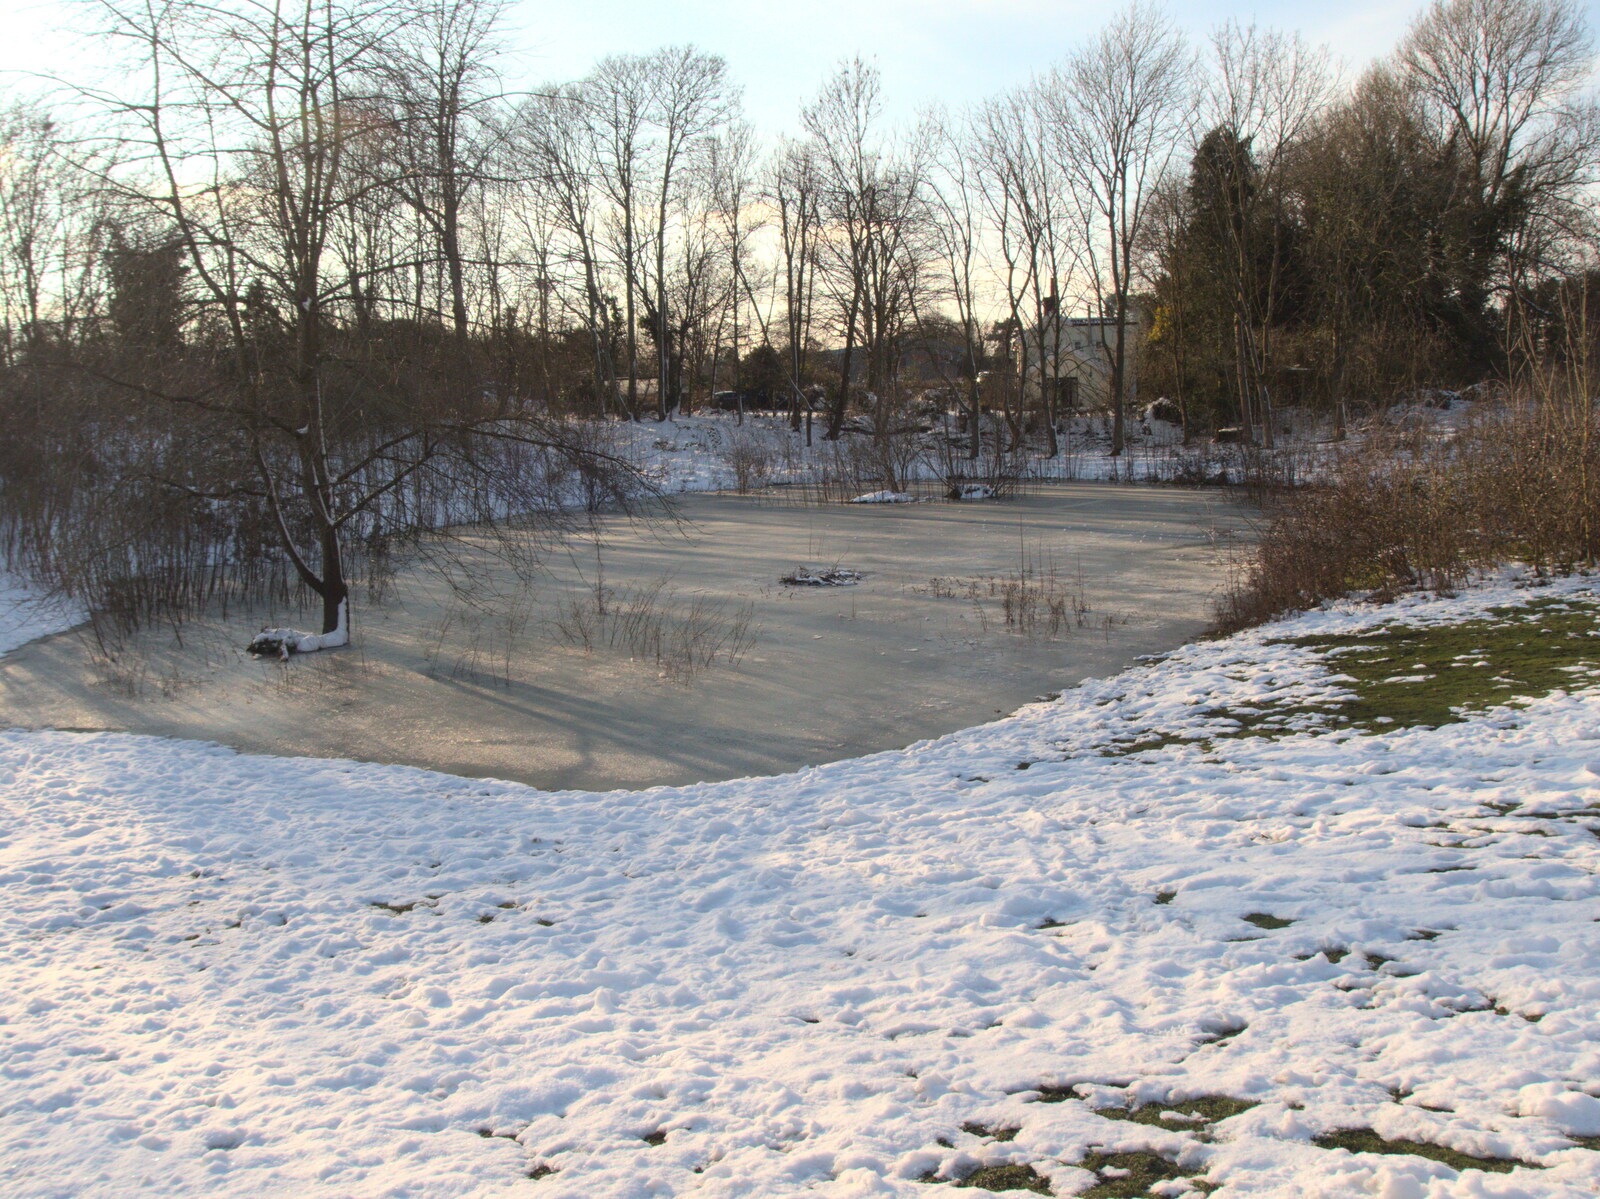 The Oaksmere pond is still frozen from Derelict Infants School and Ice Sculptures, Diss and Palgrave, Norfolk and Suffolk - 13th February 2021